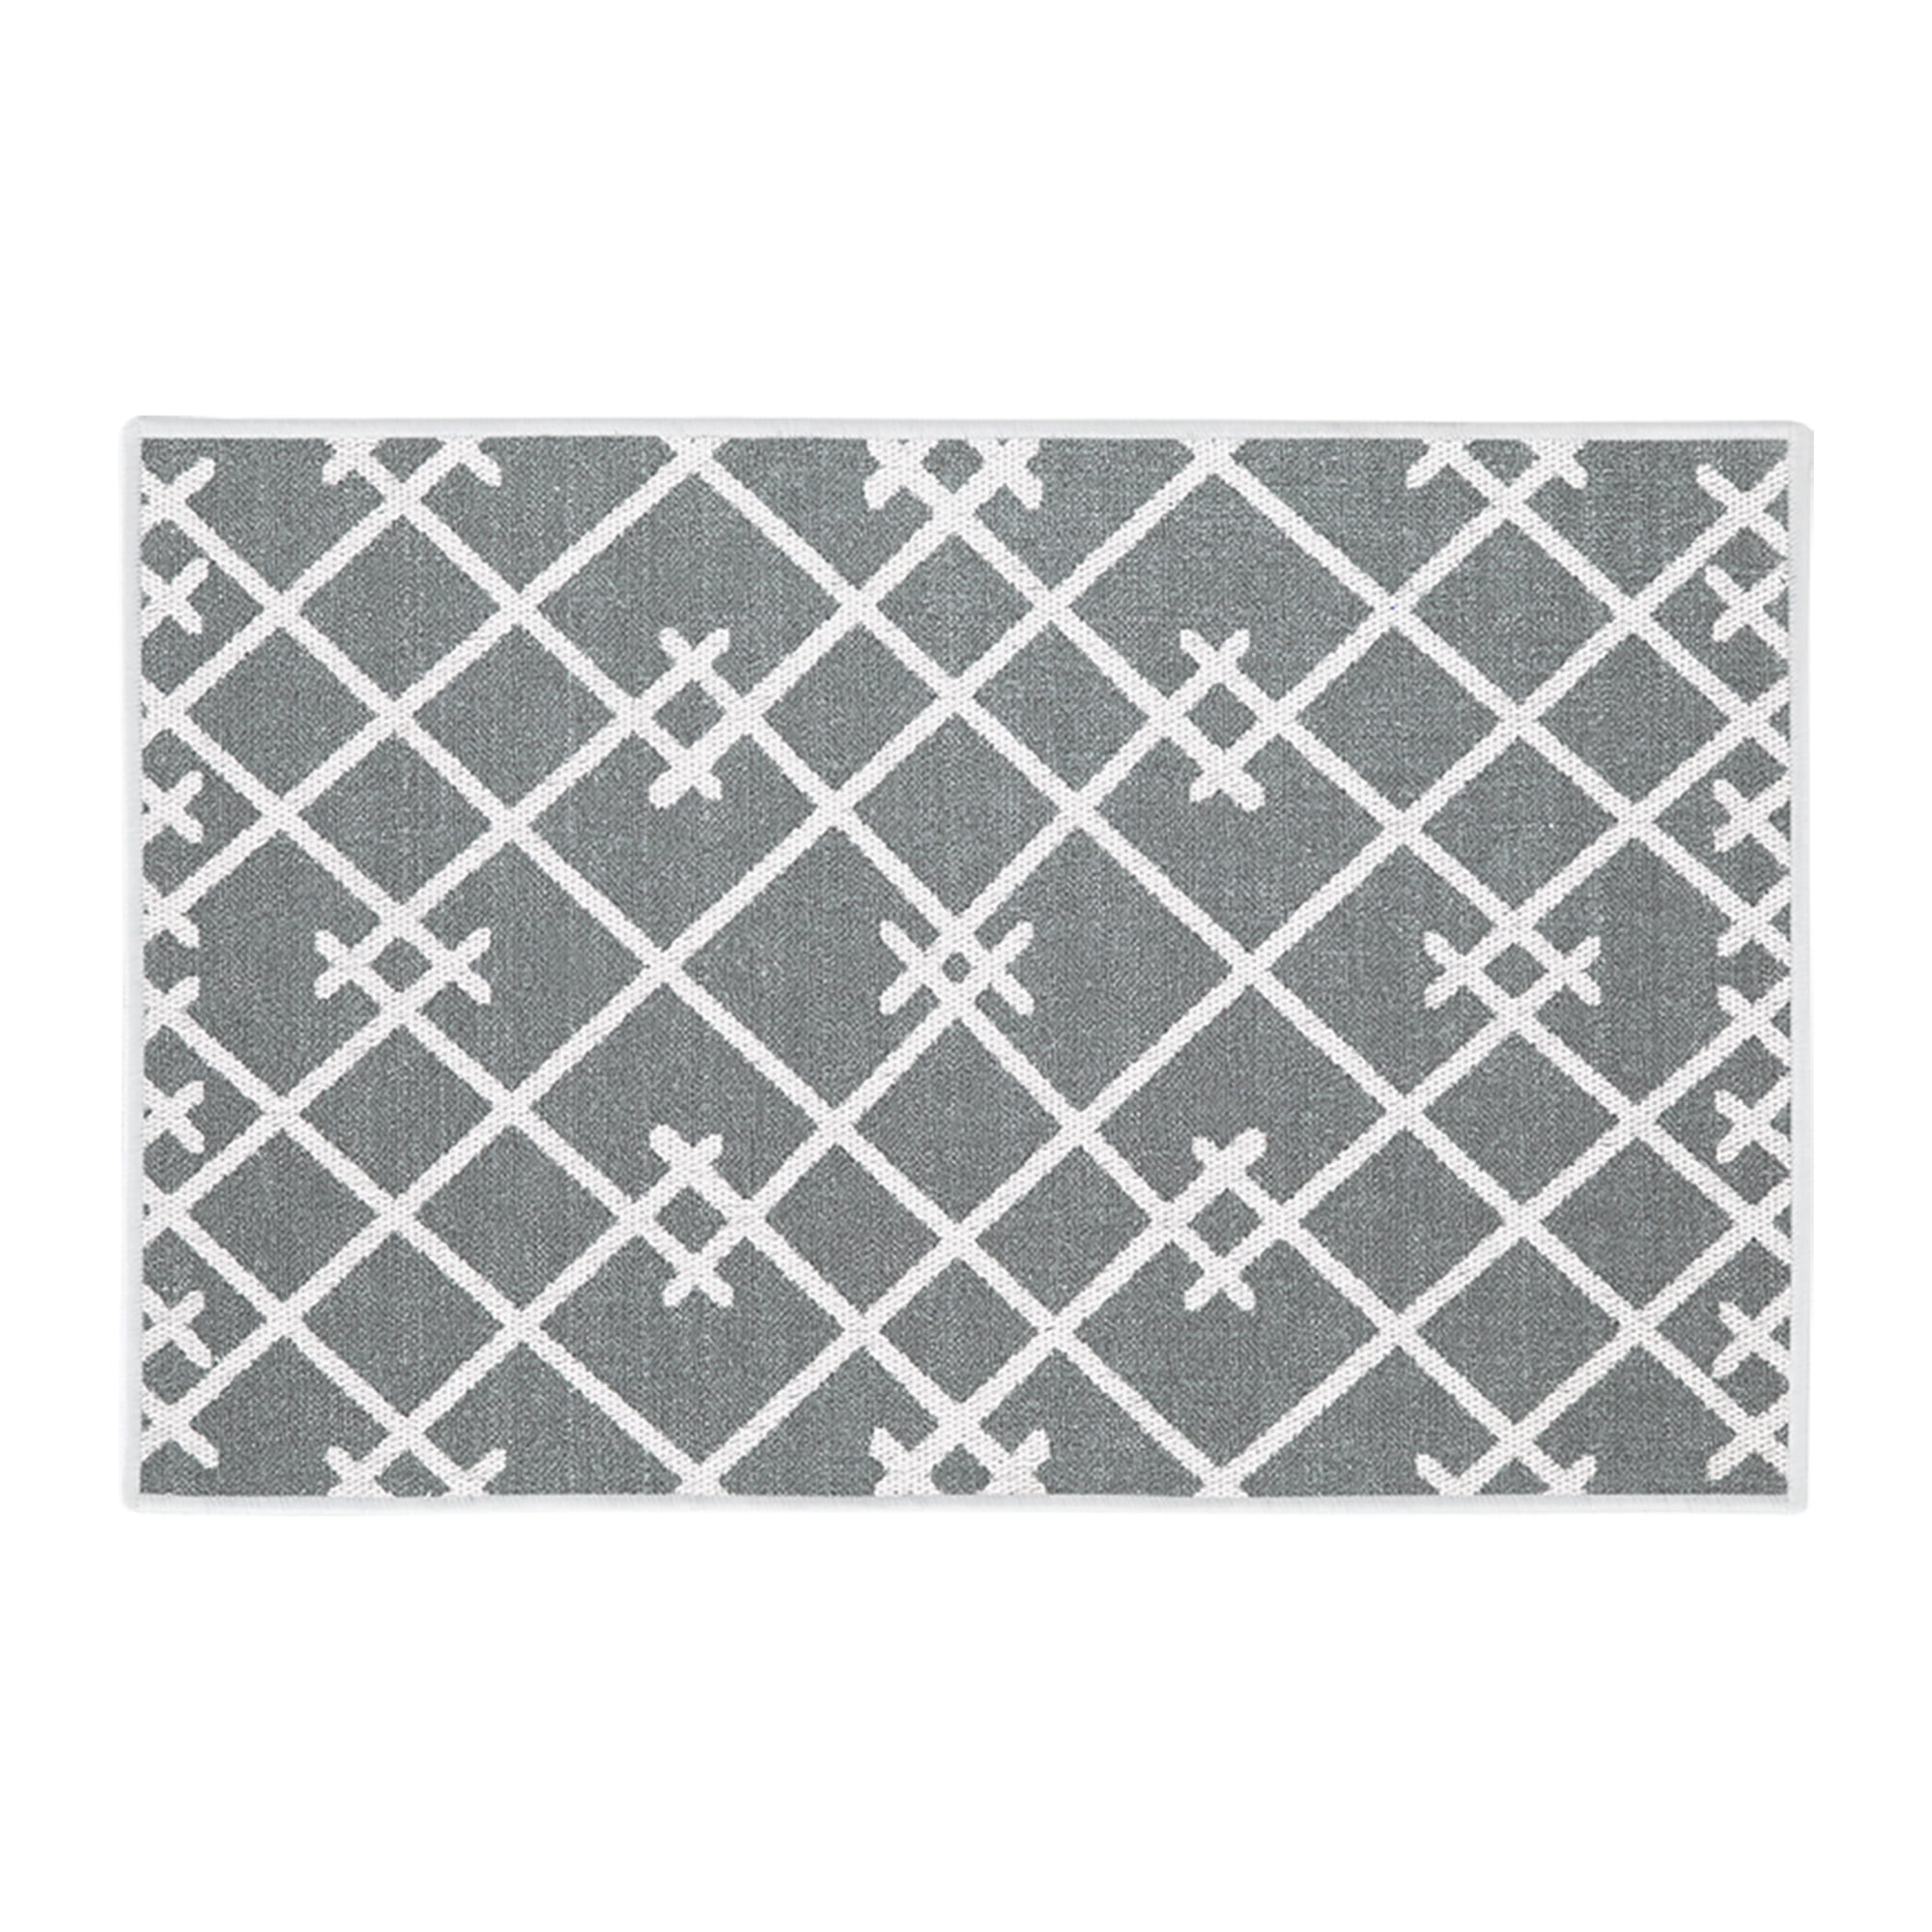 Sussexhome Non-Skid Thin Area Rugs for Laundry Room, Entryway, Bathroom and Kitchen - 20 x 31 Inches Floor Mat - Geometric-Gray